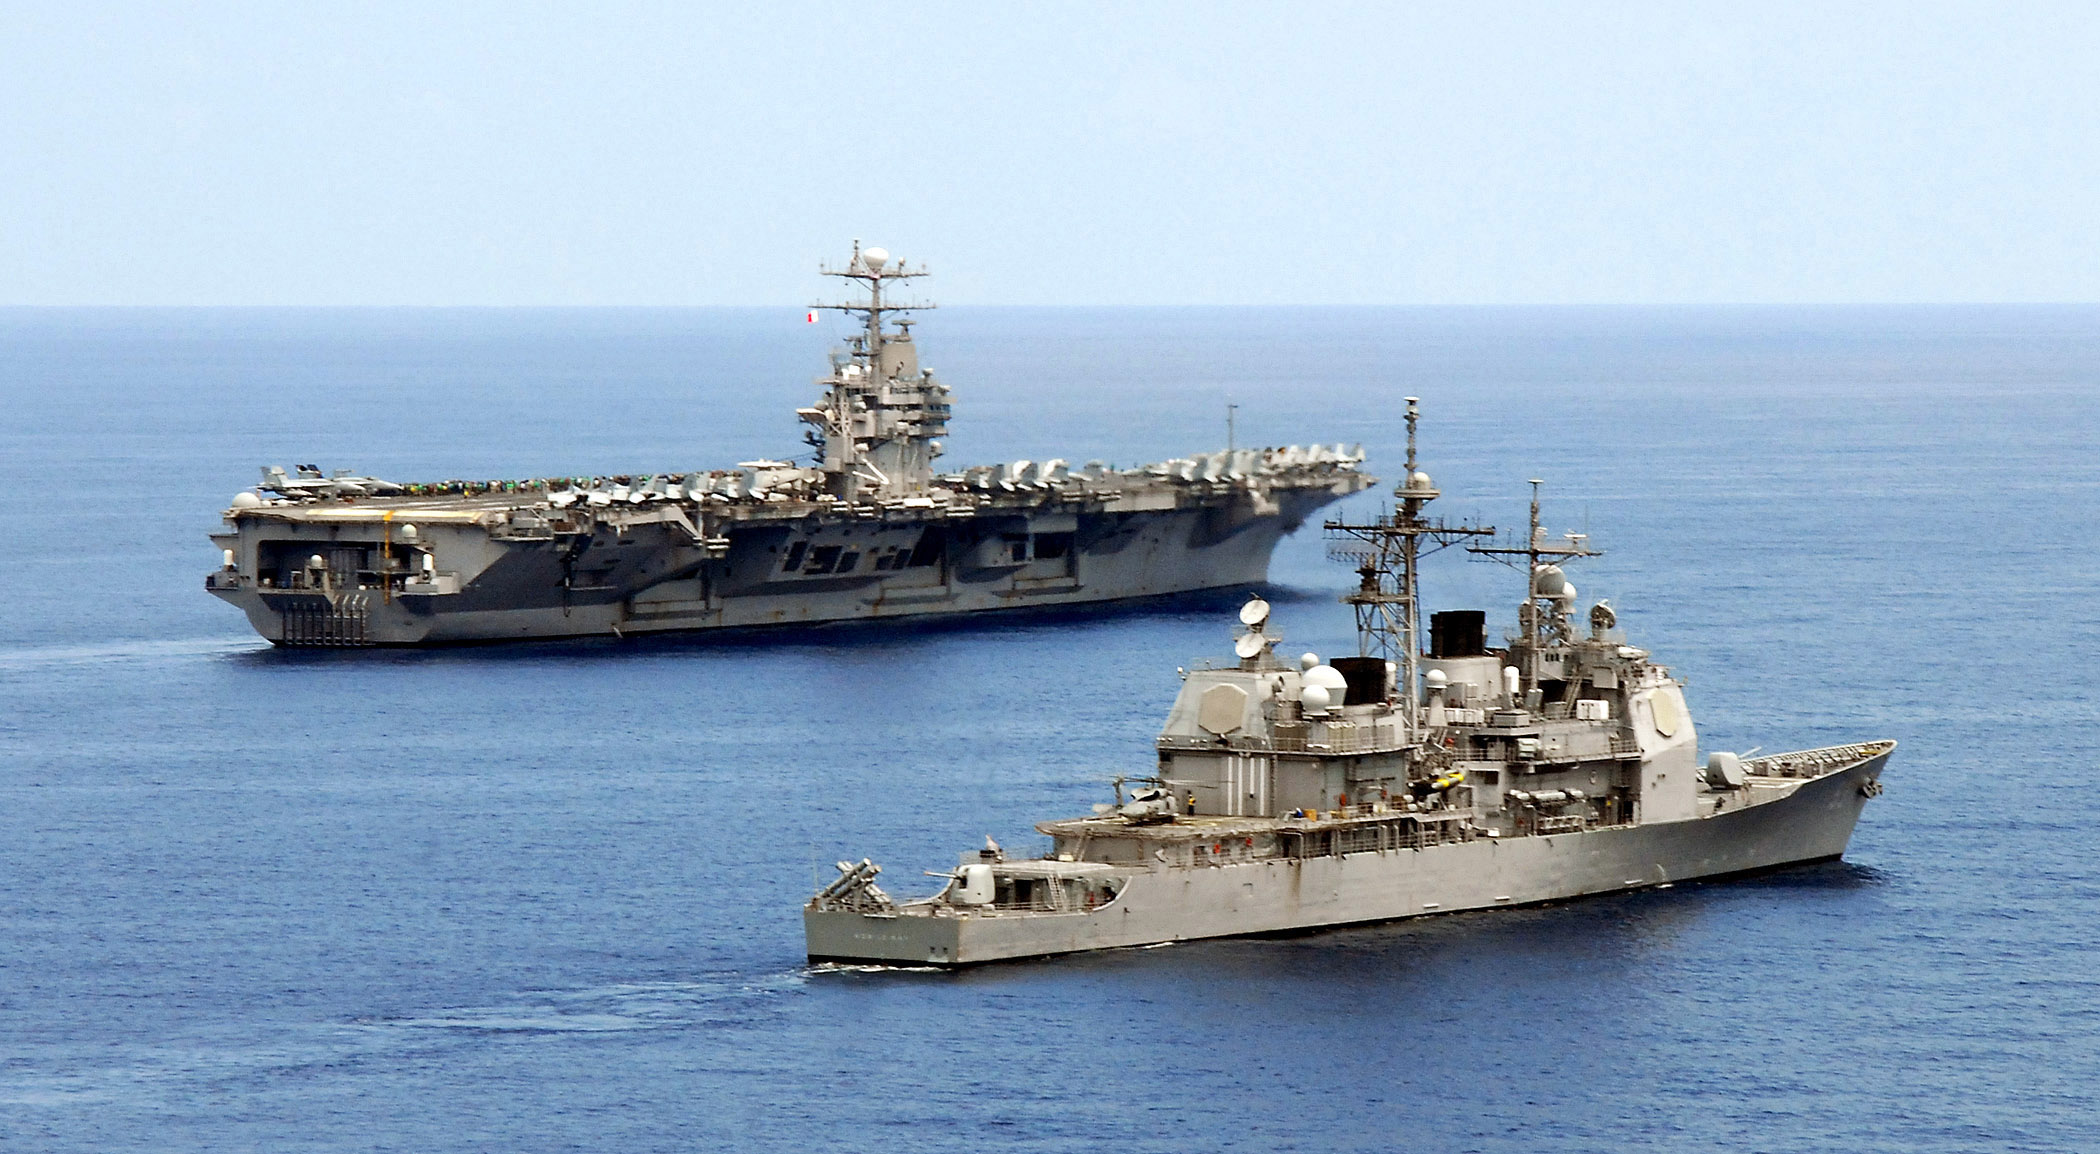 US_Navy_060417-N-5384B-049_Guided-missile_cruiser_USS_Mobile_Bay,_foreground_and_Nimitz-class_aircraft_carrier_USS_Abraham_Lincoln,_through_the_South_China_Sea.jpg